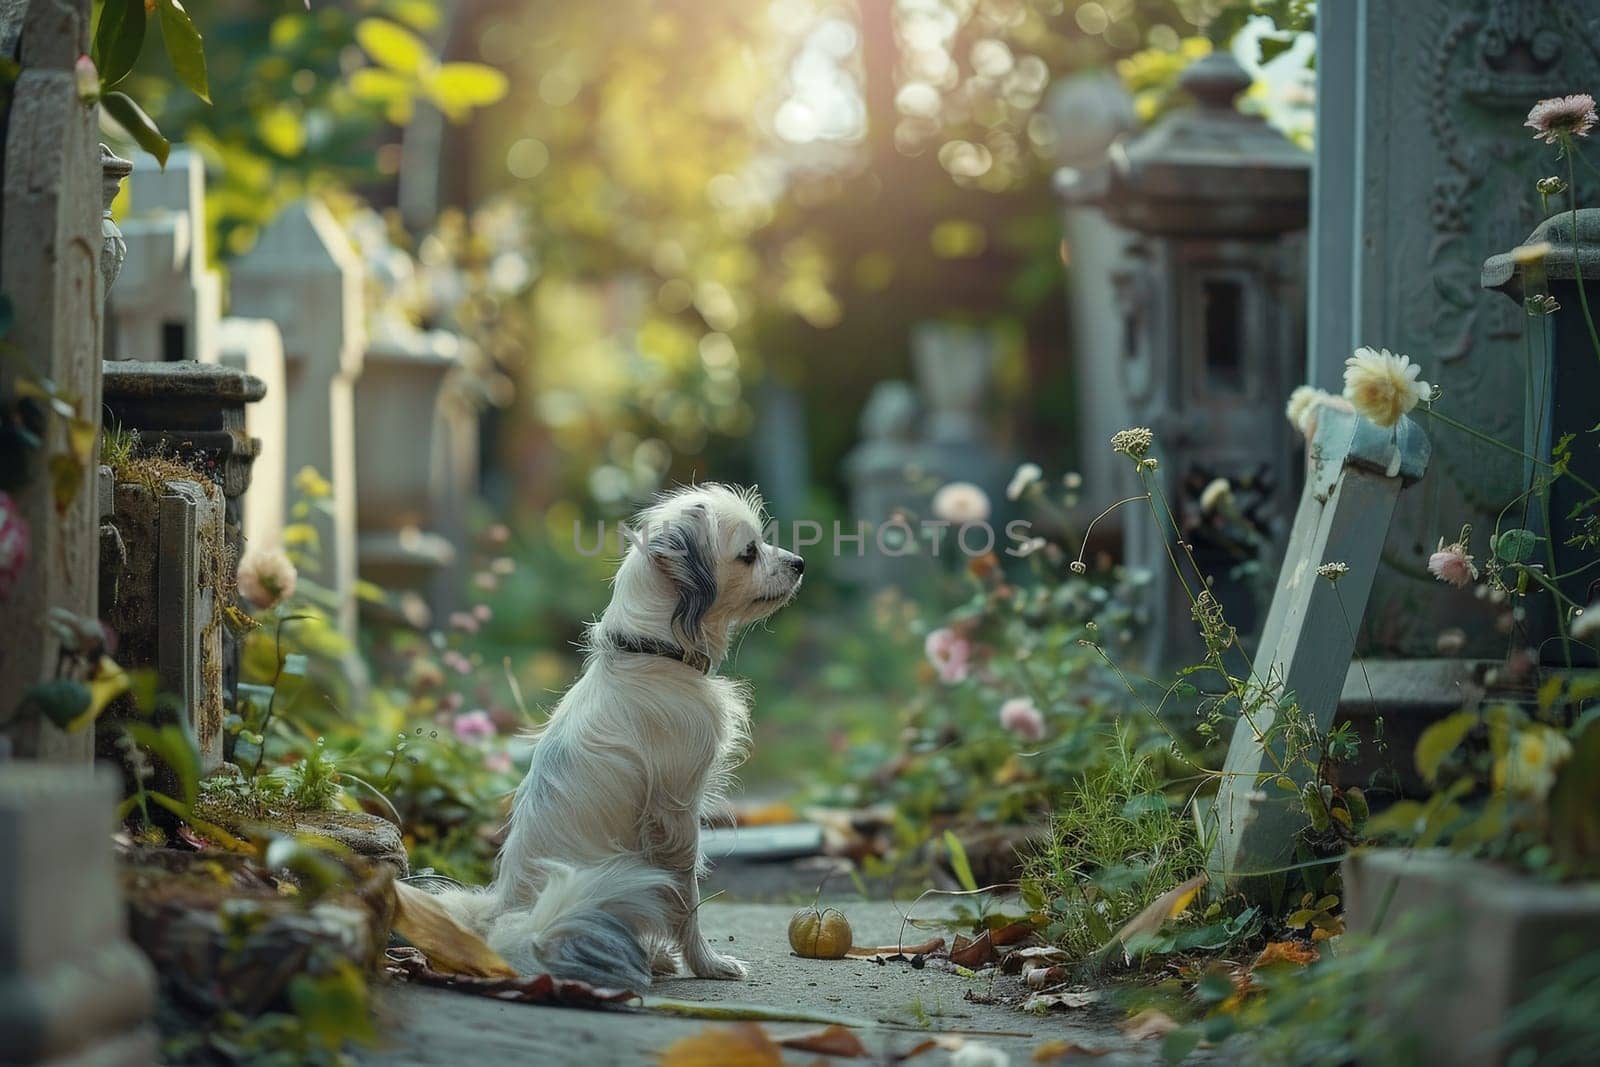 A dog in cemetery, A dog sitting next to a grave in a cemetery, In remembrance of a pet.